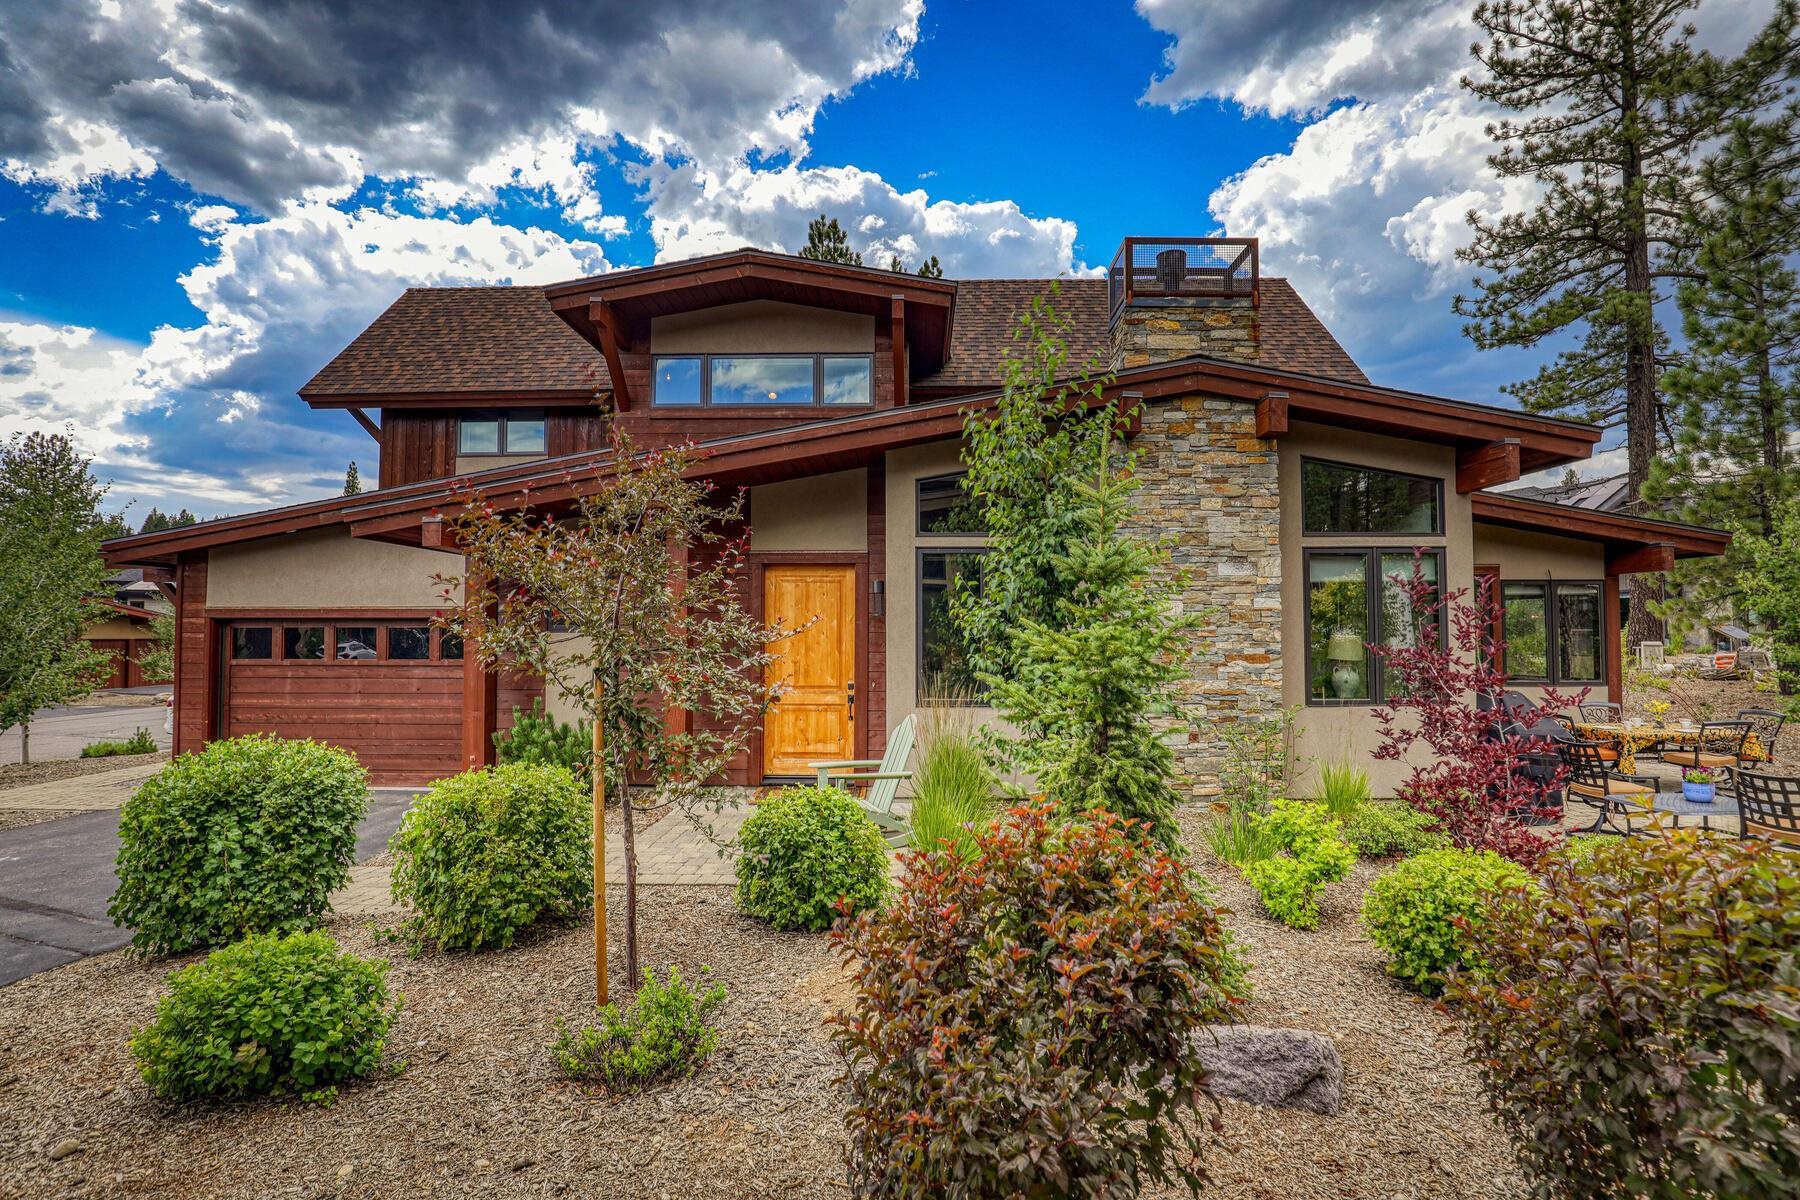 Image for 9142 Heartwood Drive, Truckee, CA 96161-1234